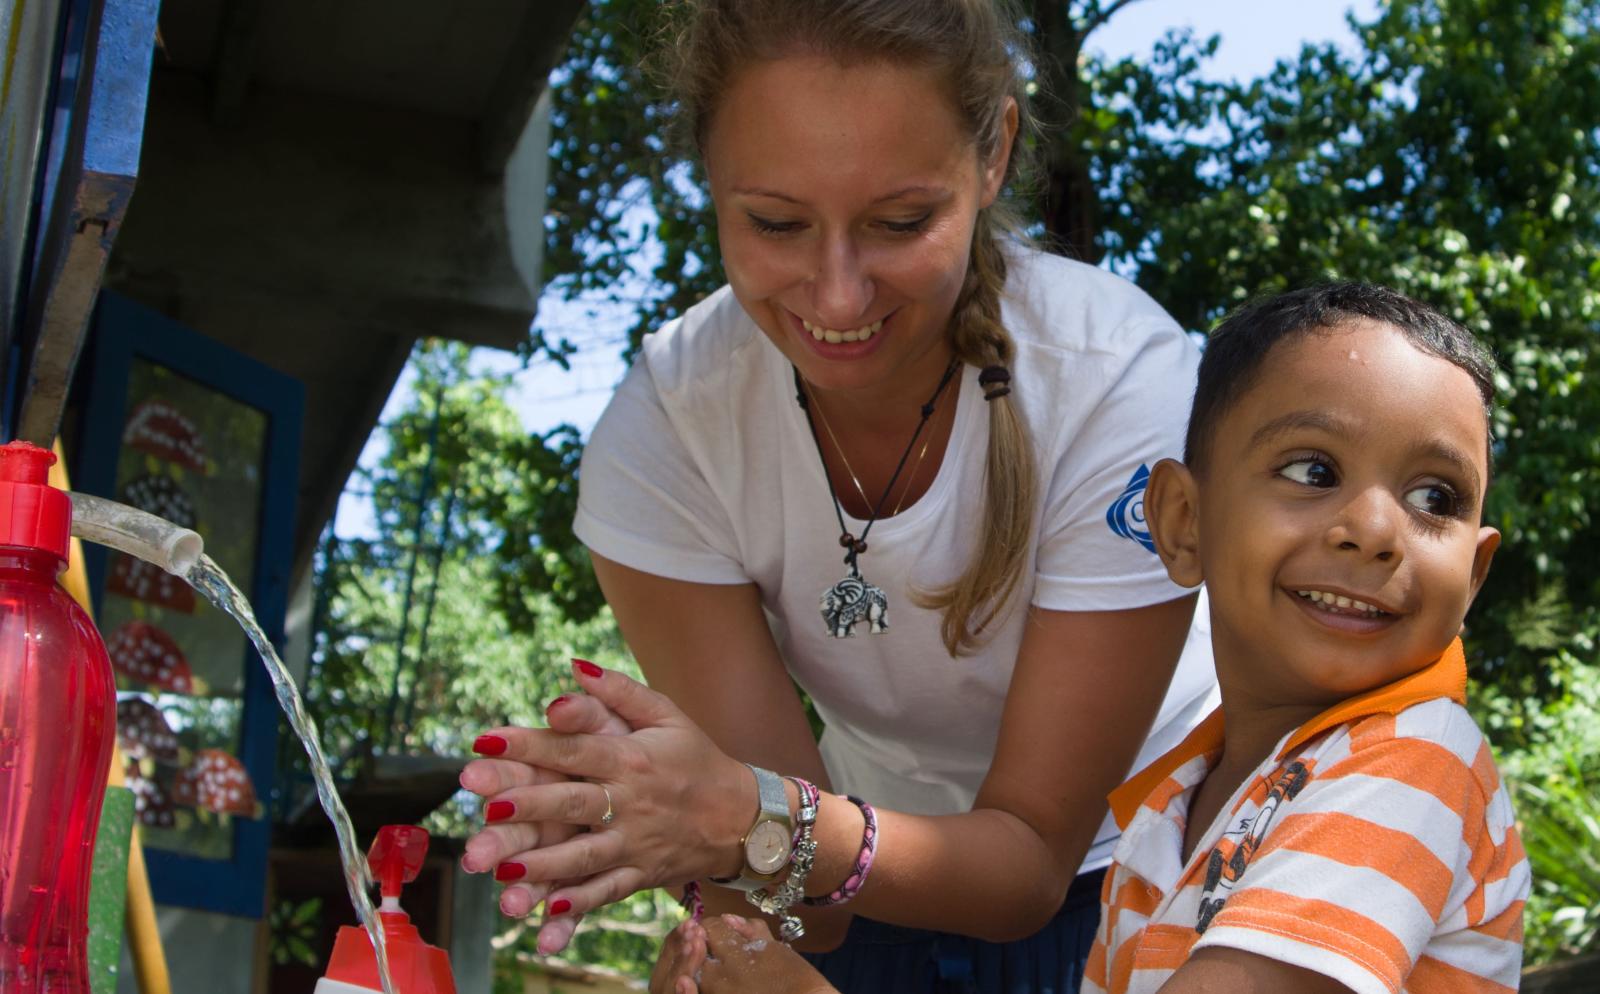 A Projects Abroad volunteer is washing her hands while volunteering abroad.